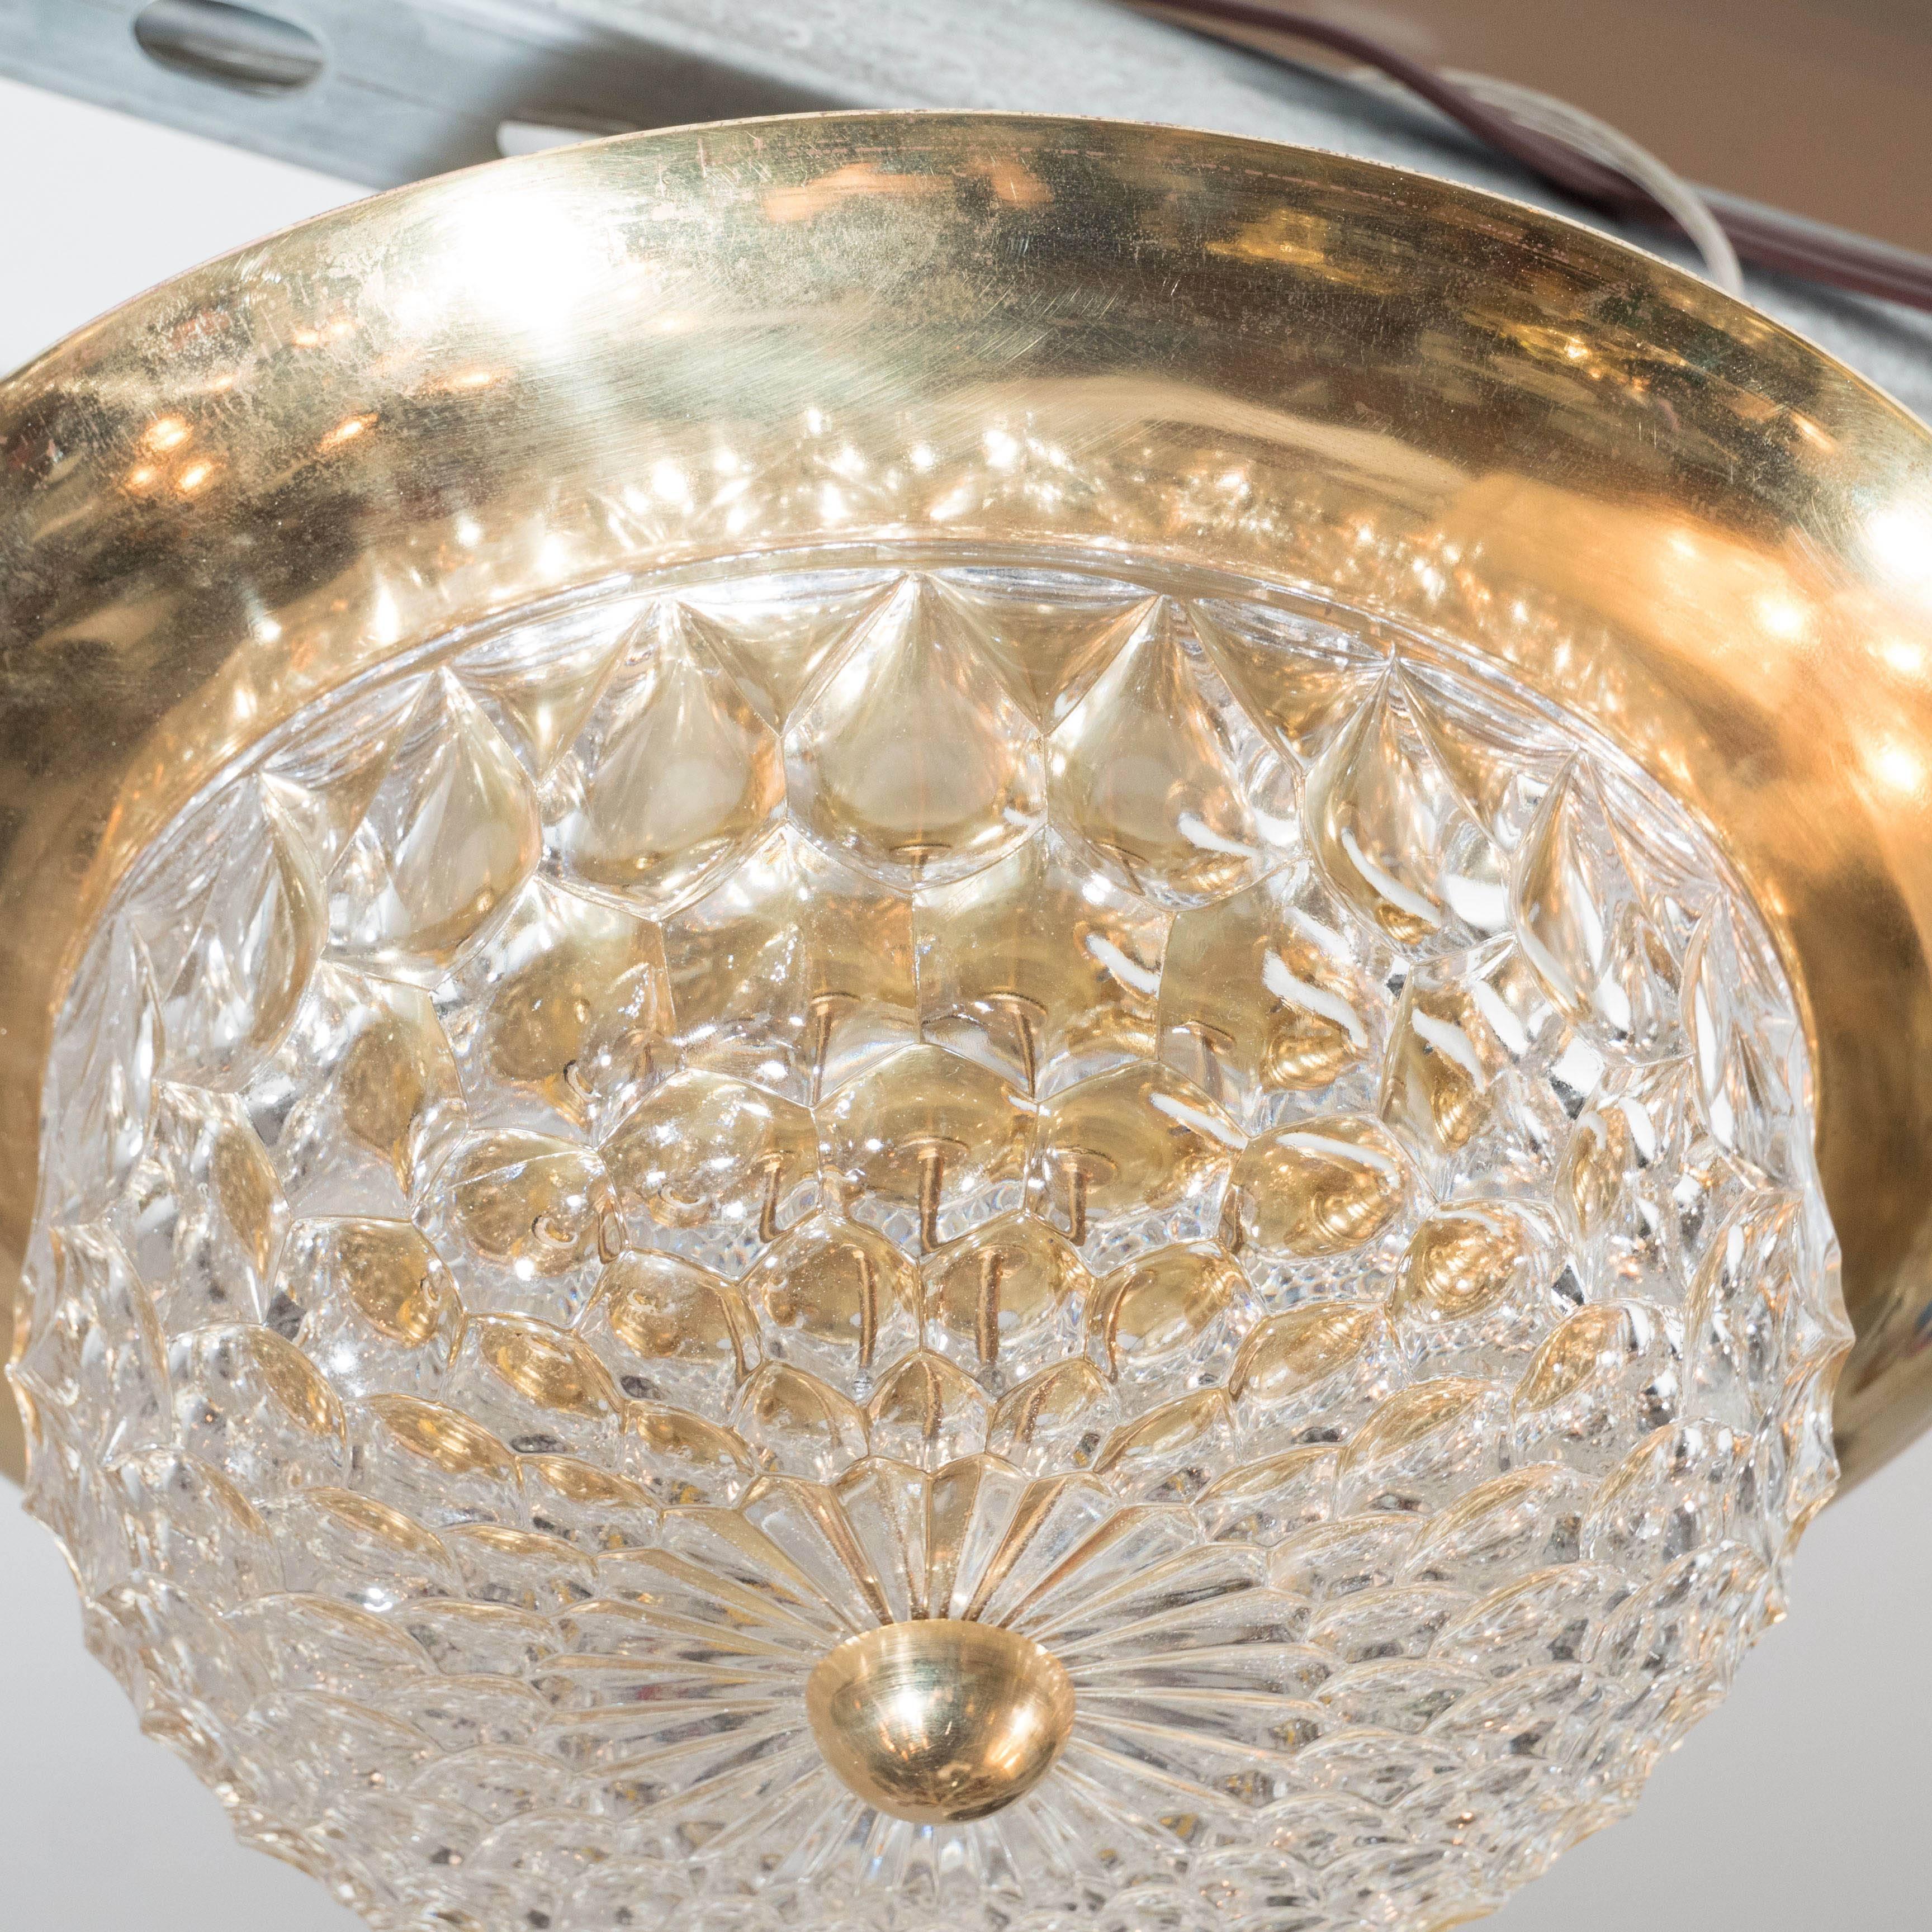 A Mid-Century Modernist flush mount chandelier with polished brass fittings. A diamond shape faceted crystal dome is supported by a polished brass fitting and contouring frame. It has been completely rewired and is in excellent condition.